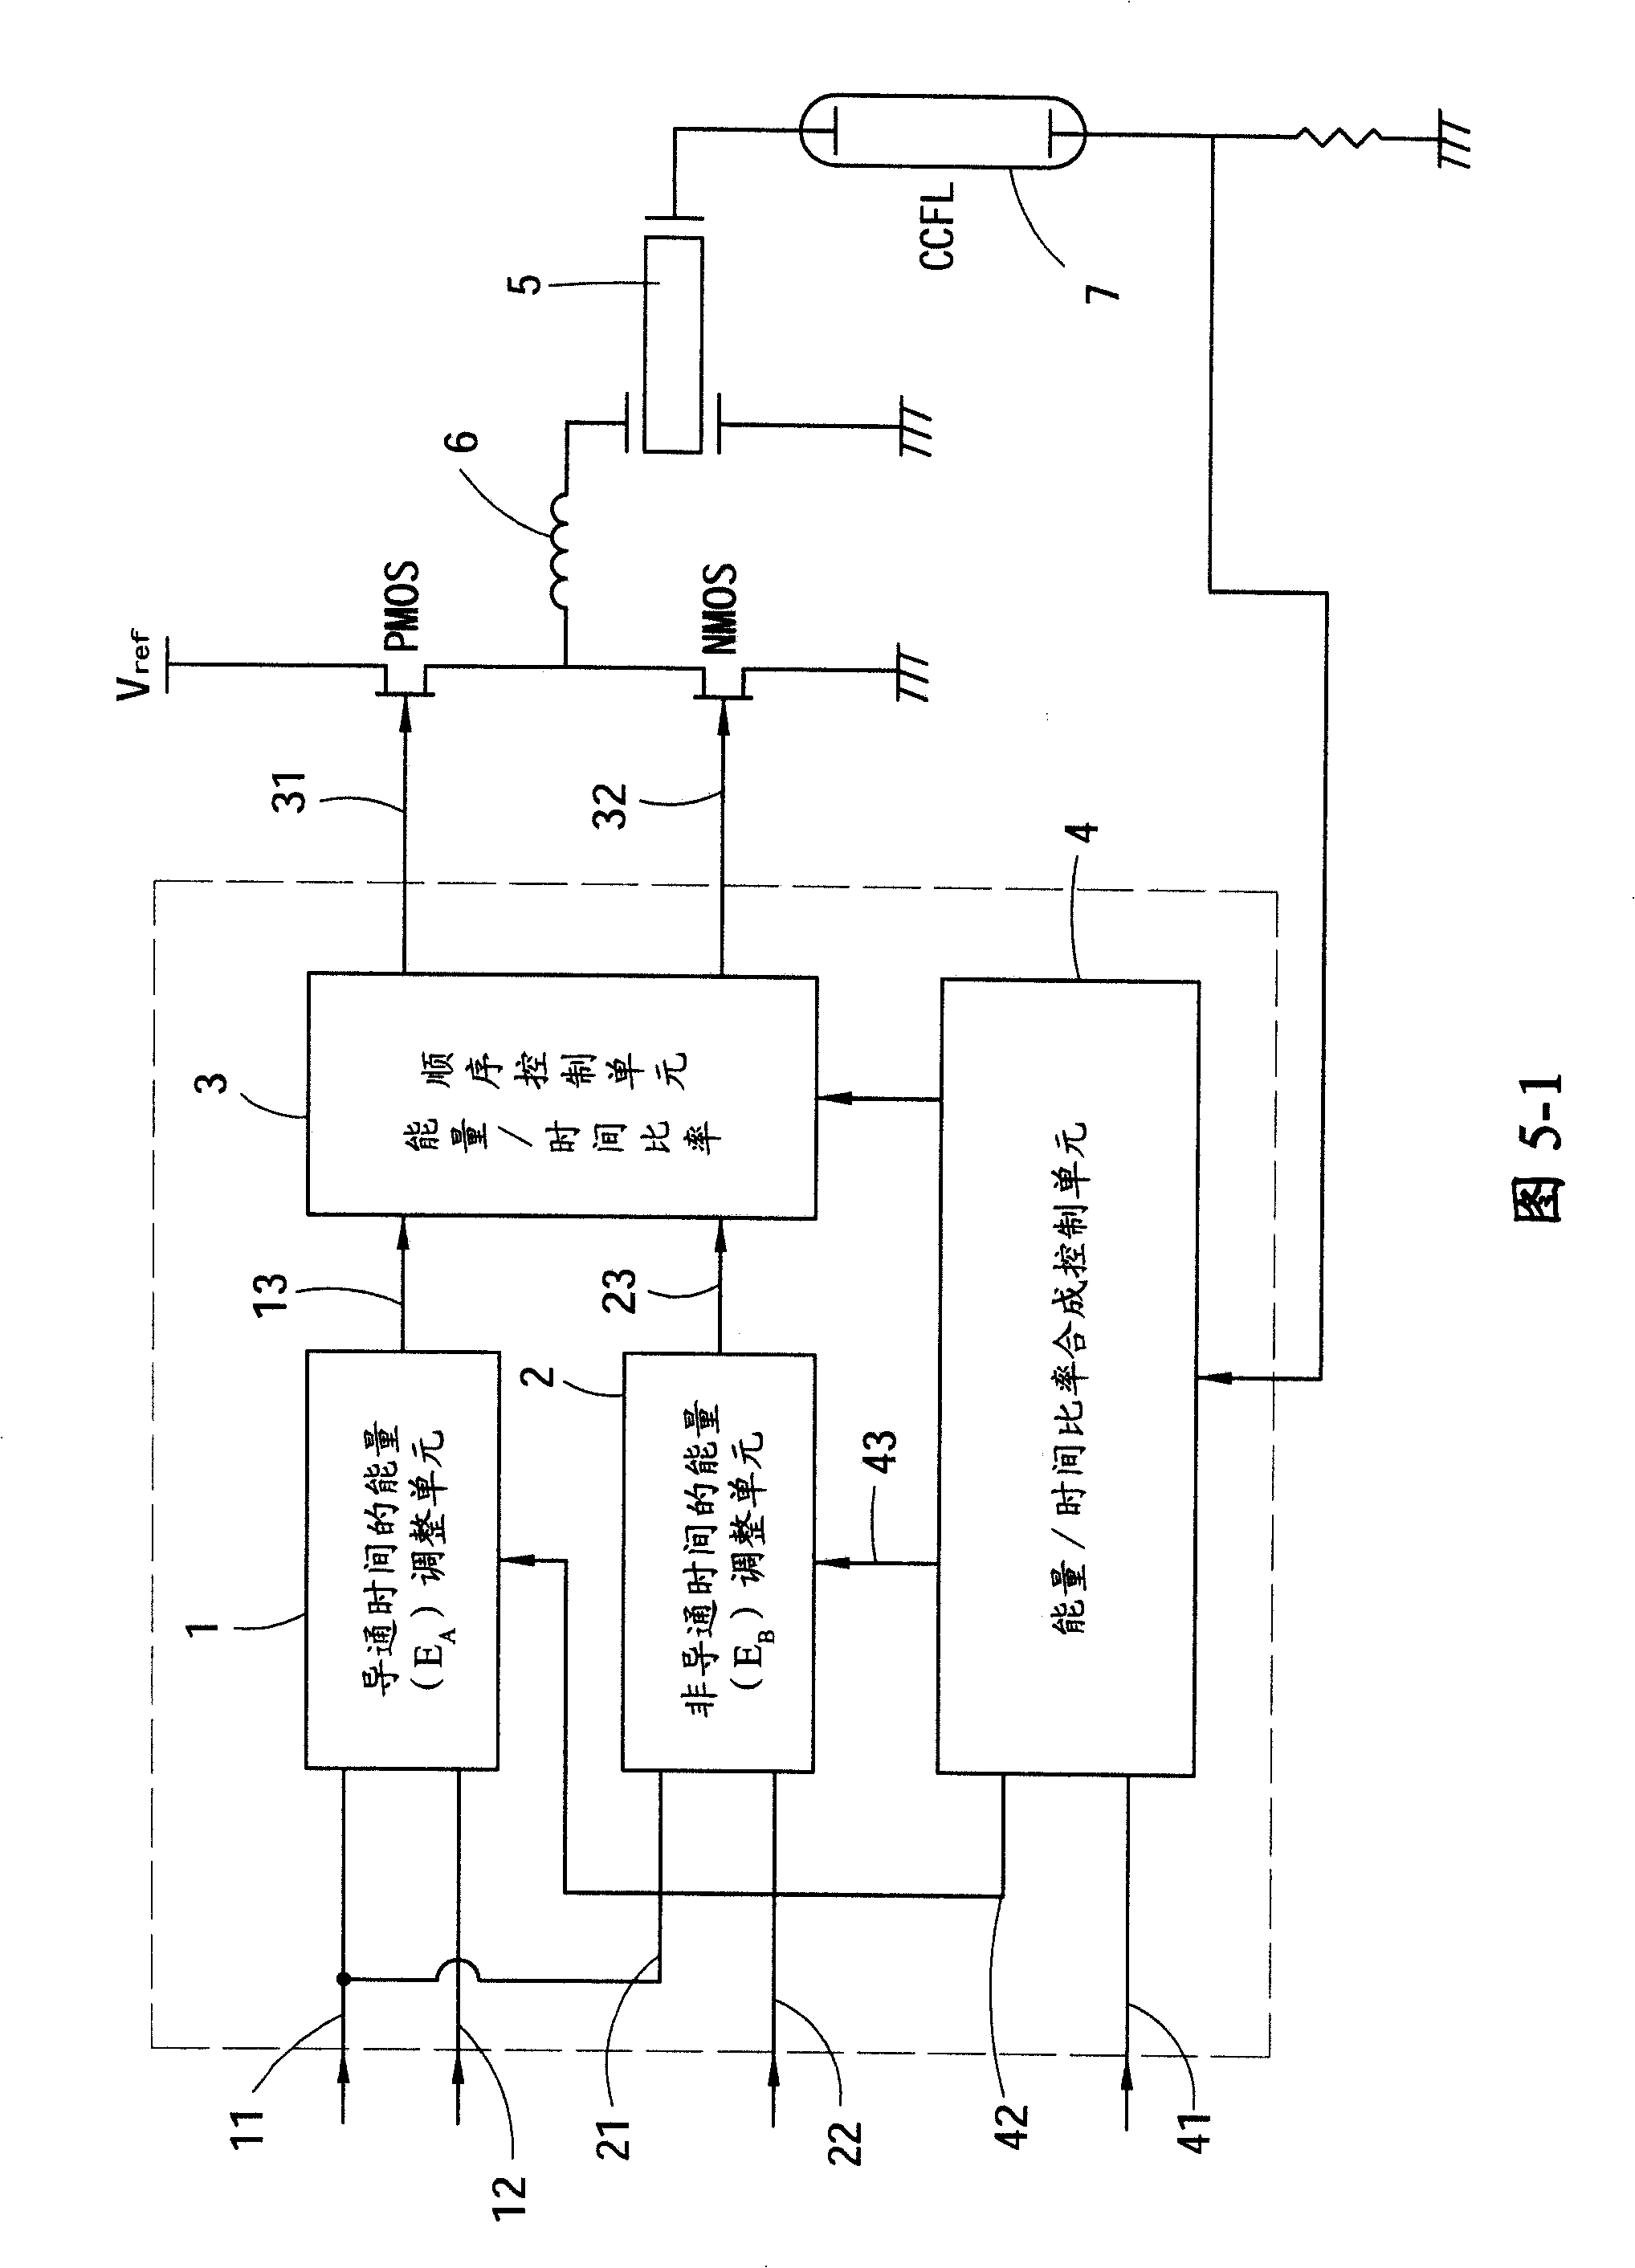 Multiple changing mode power control method